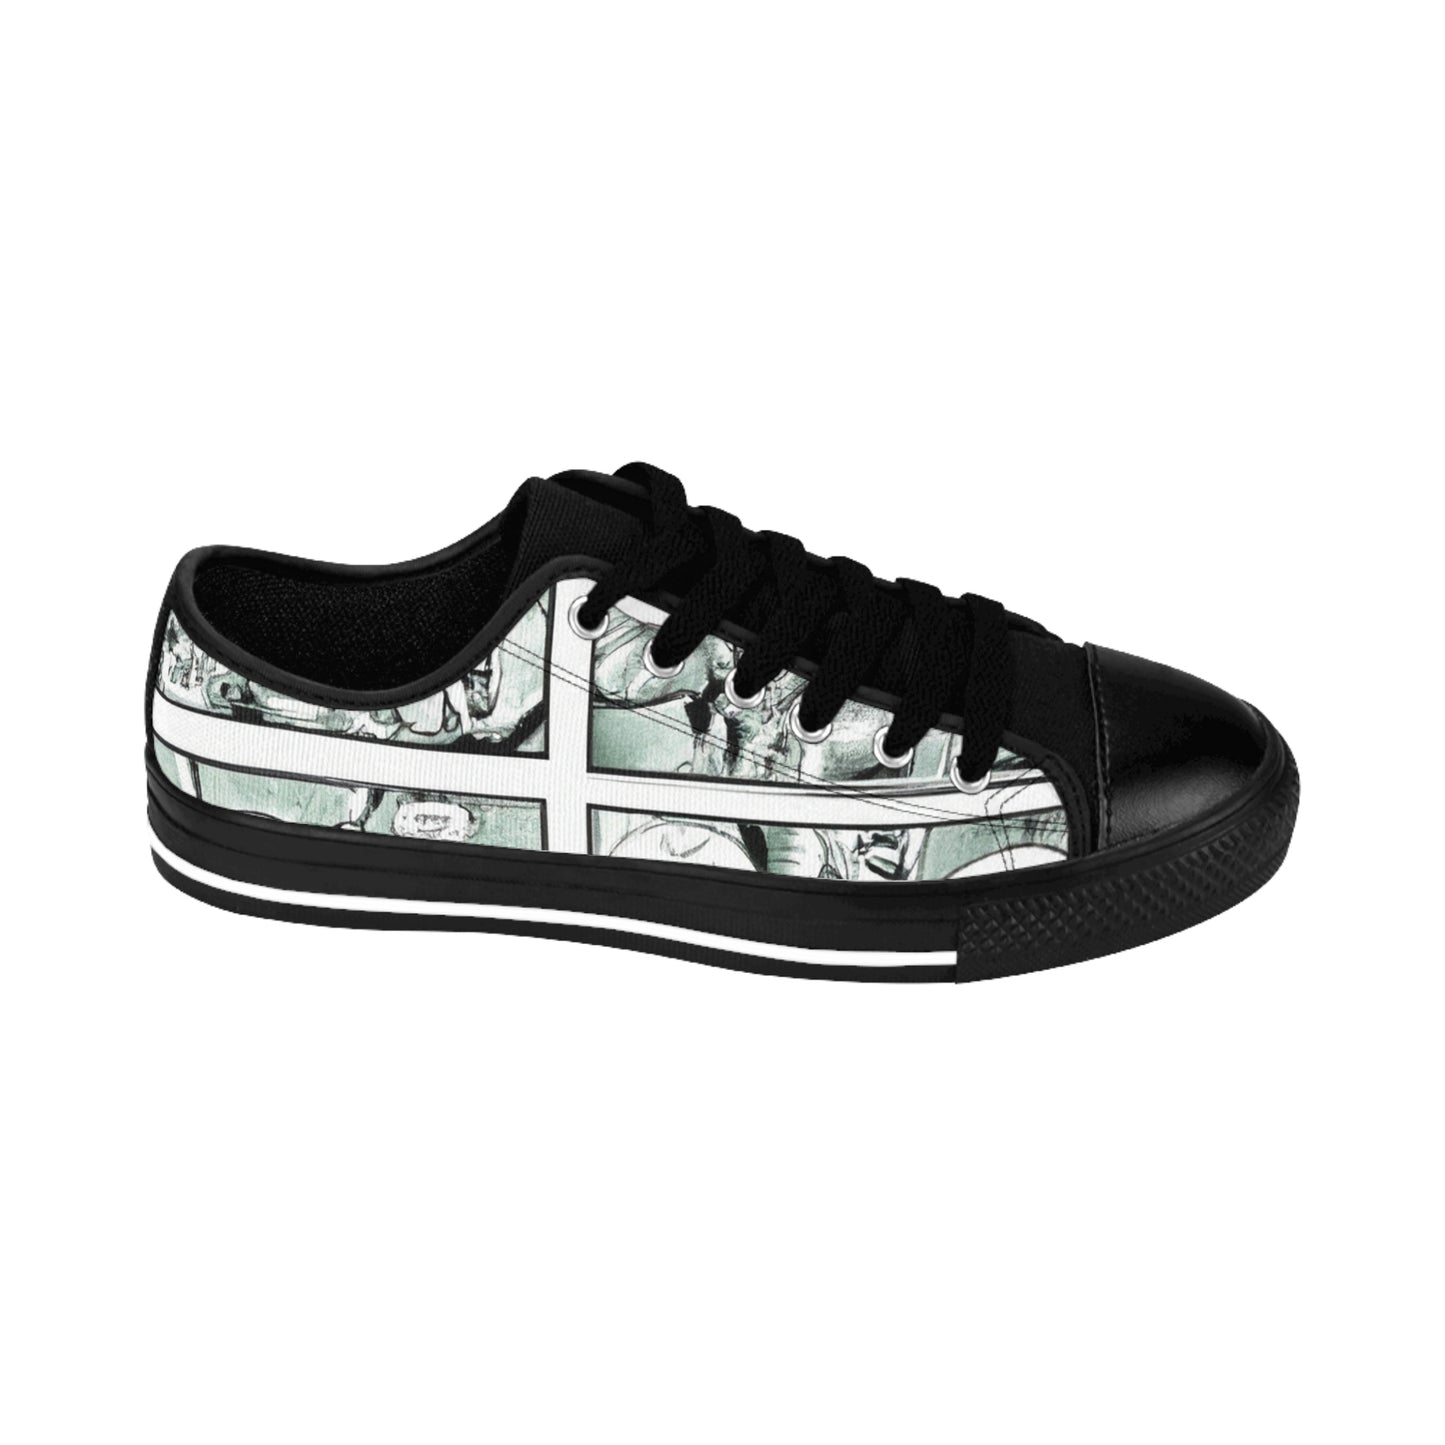 Sir Fionna of Shoeford - Comic Book Low Top